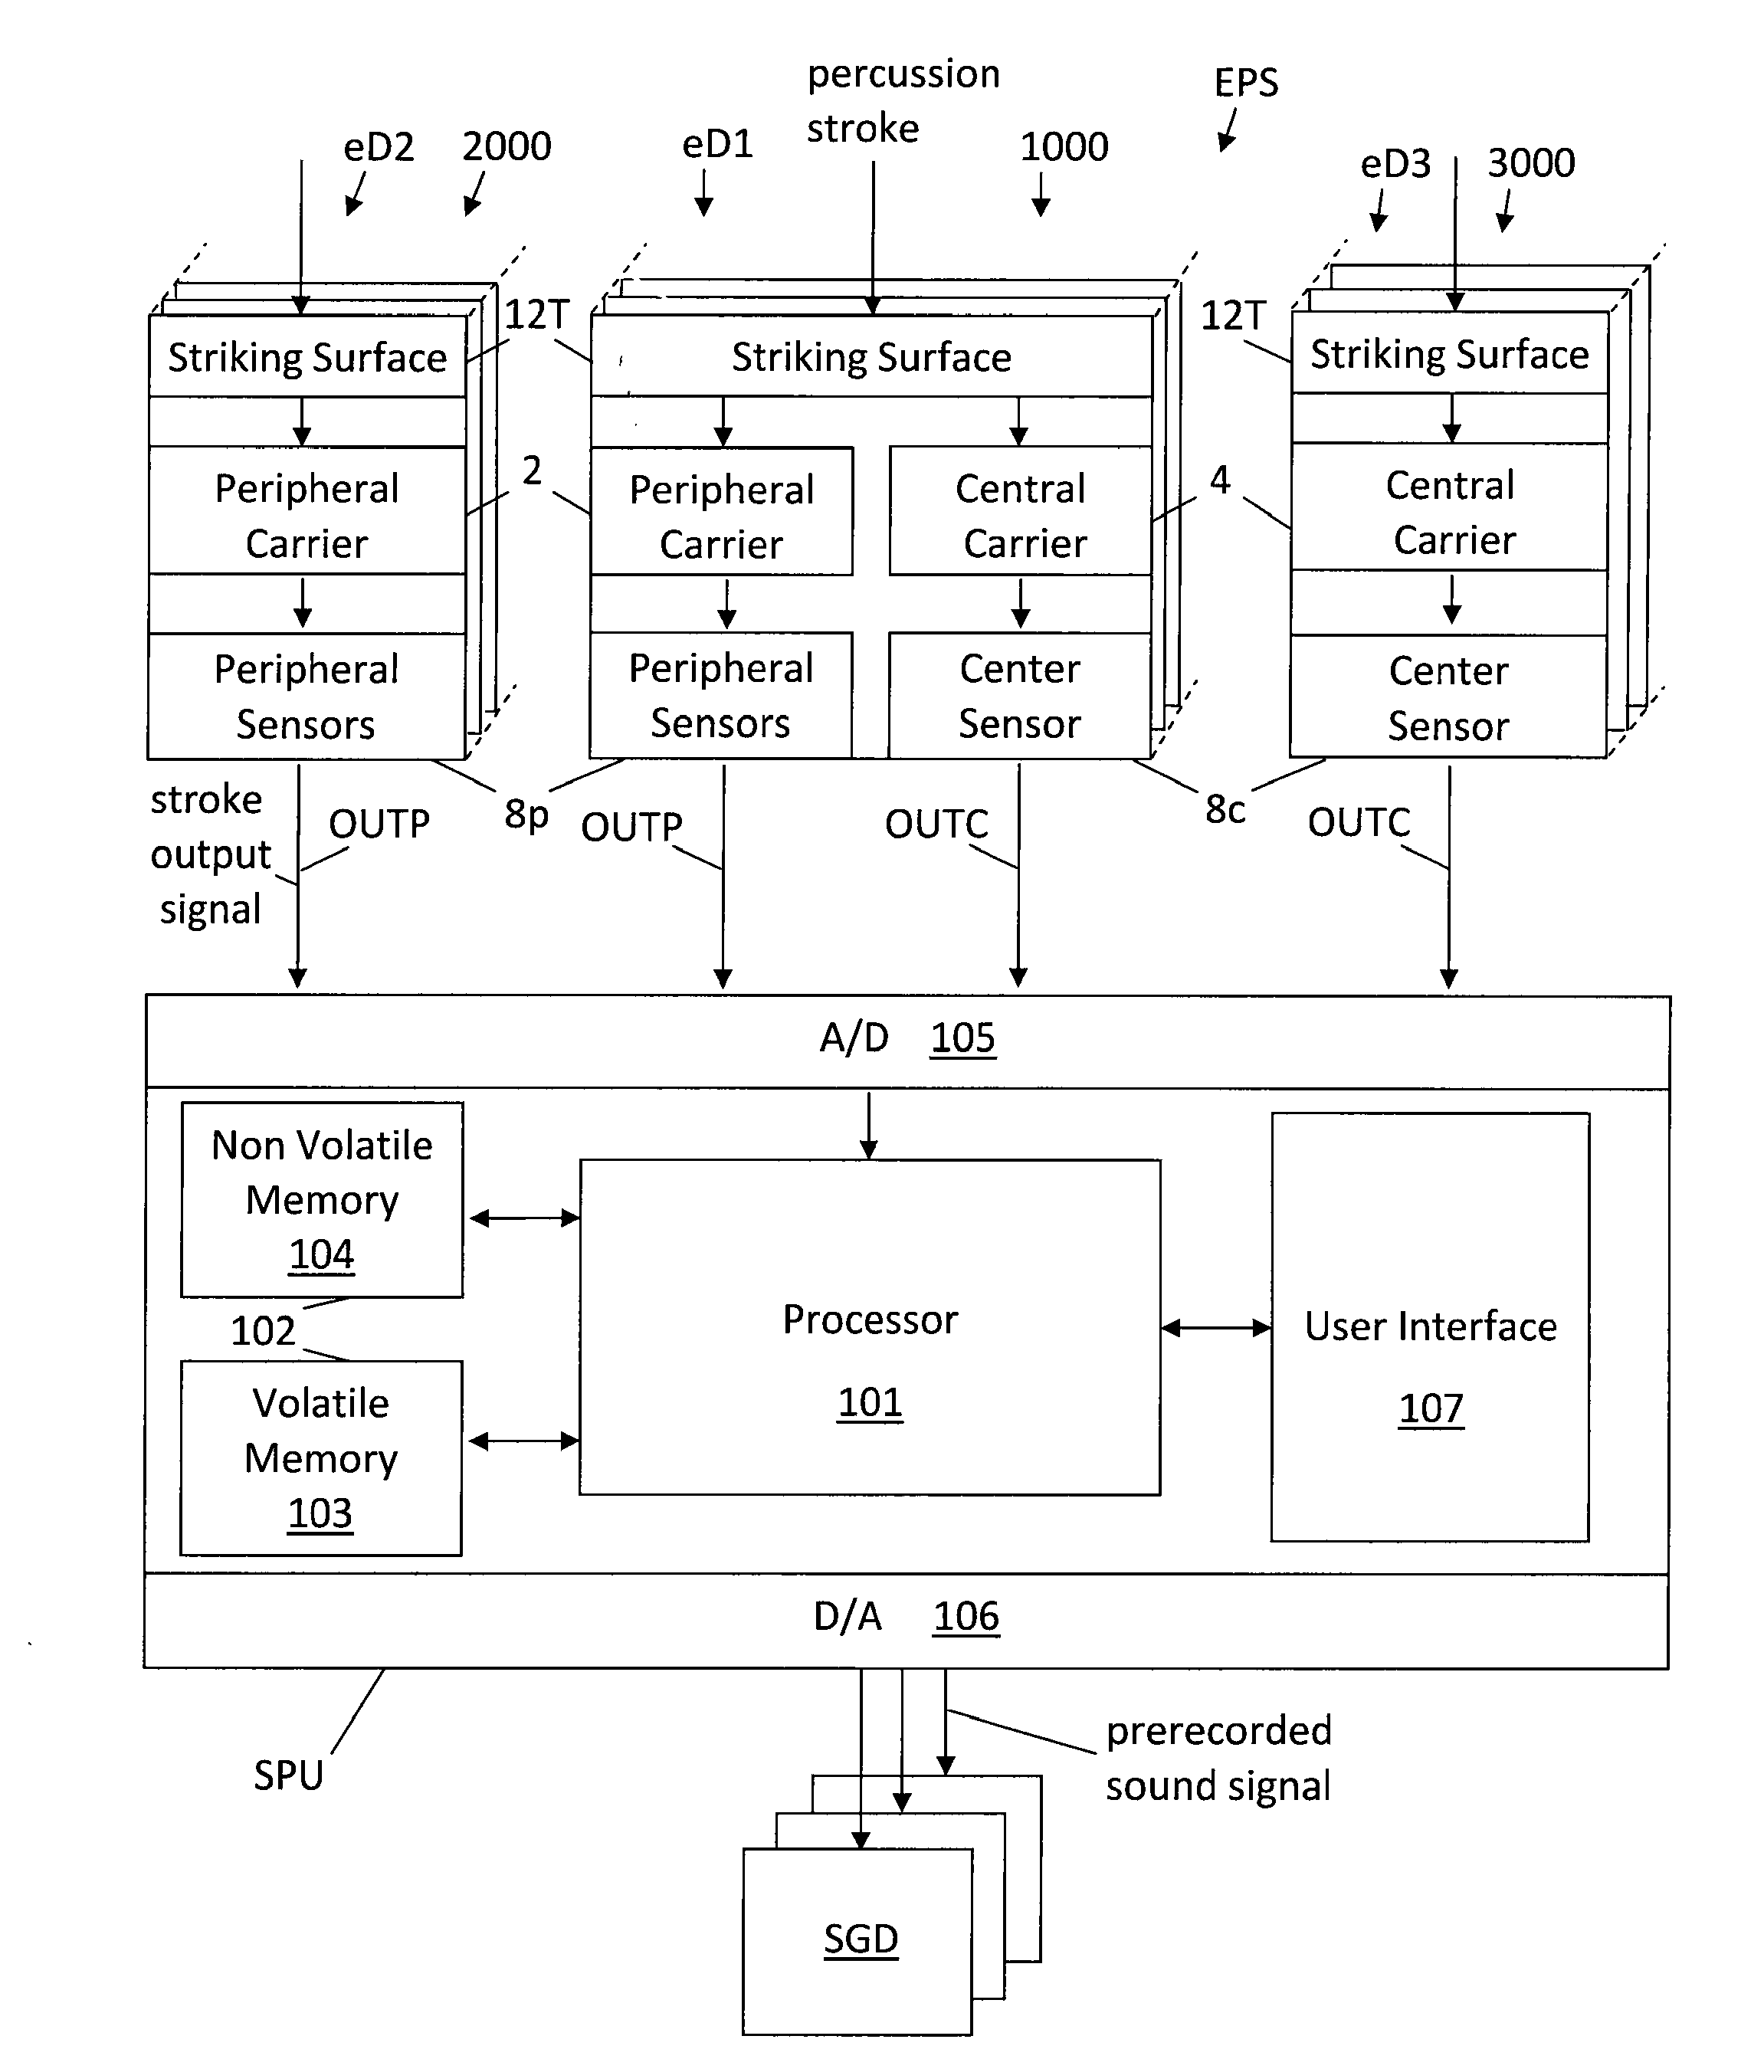 Electronic percussion device and method